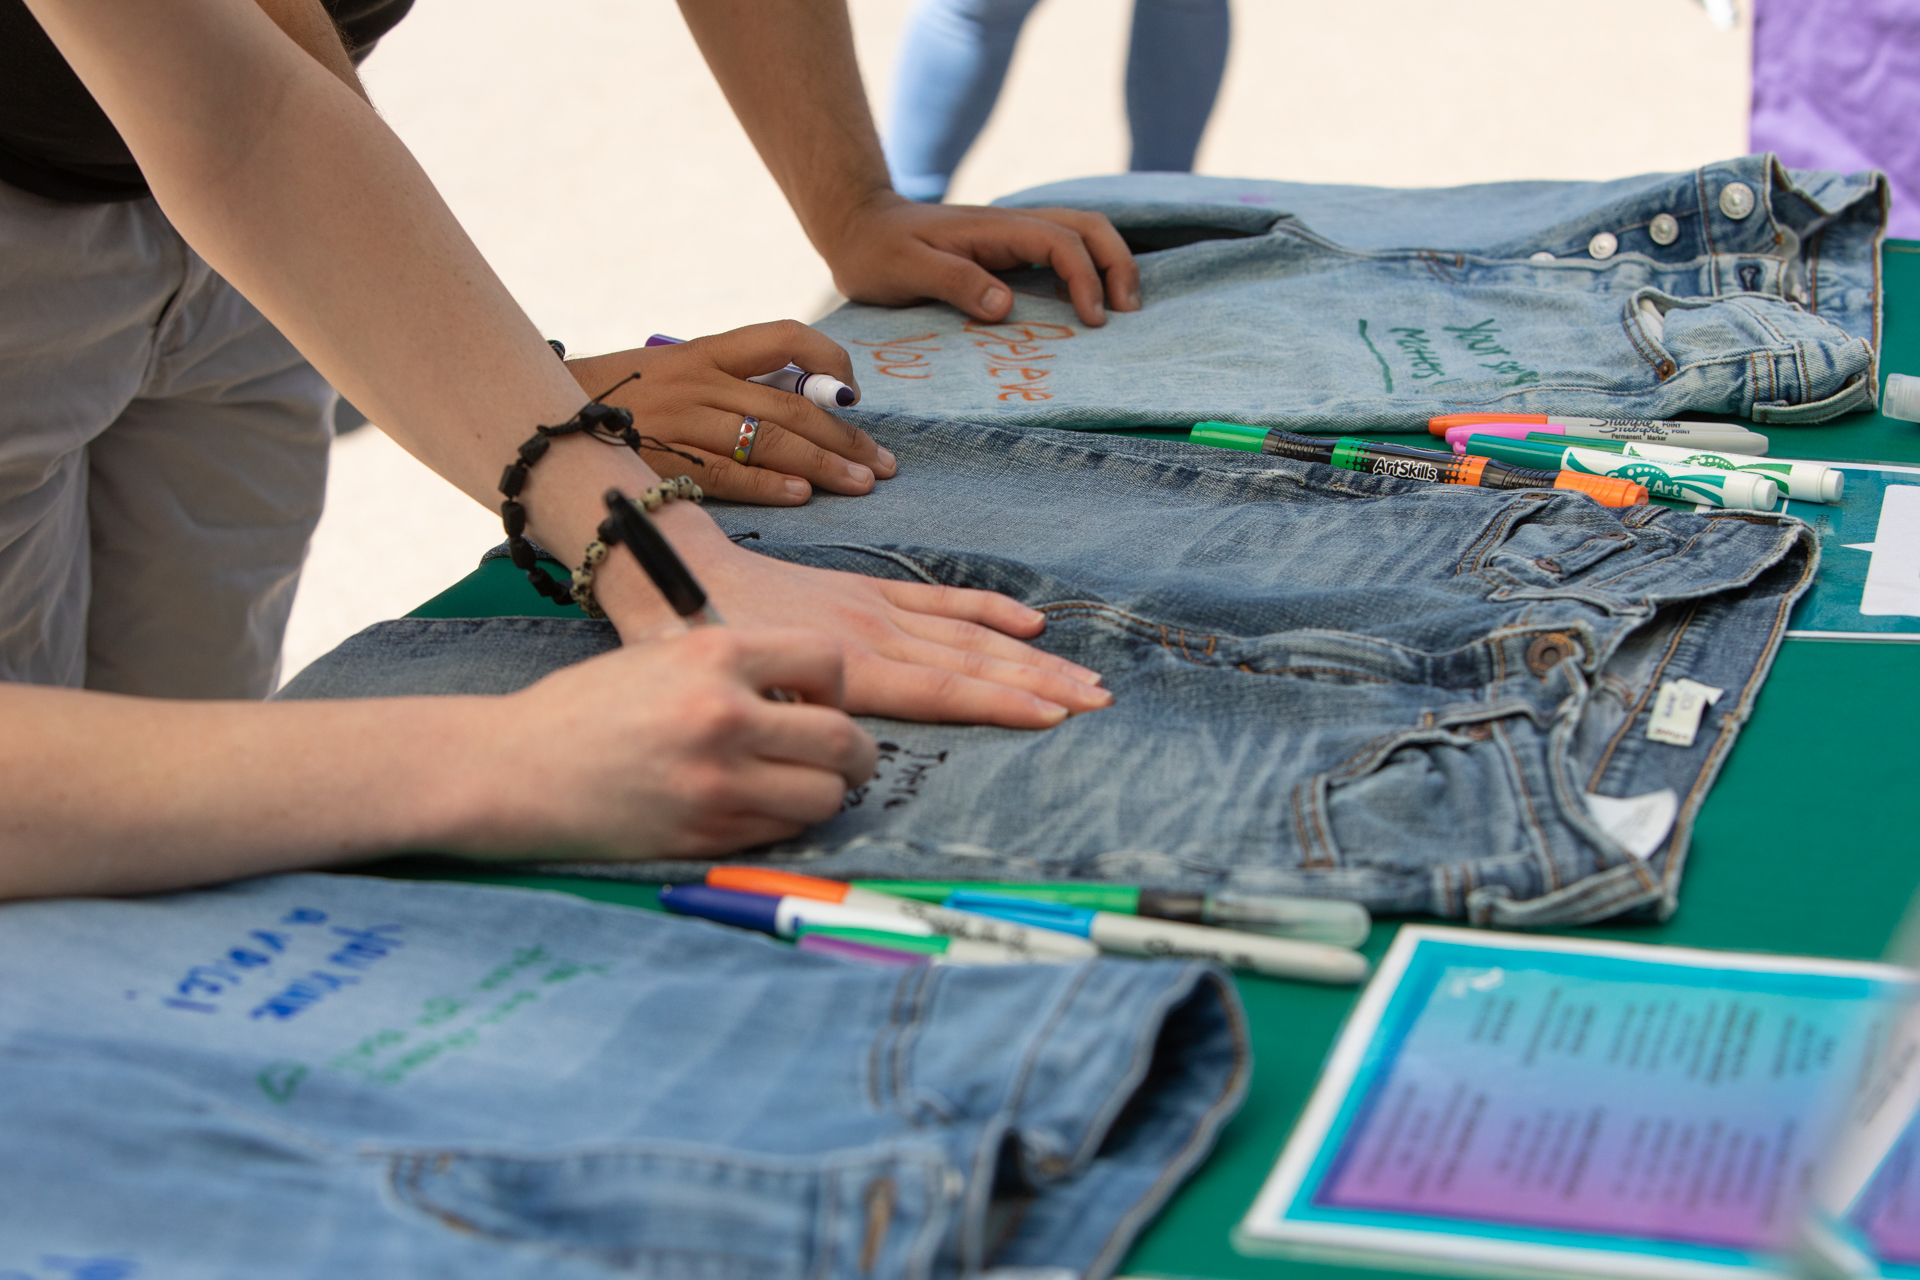 Sac State students wrote messages of support for survivors of sexual violence on pairs of jeans during the Denim Day event.